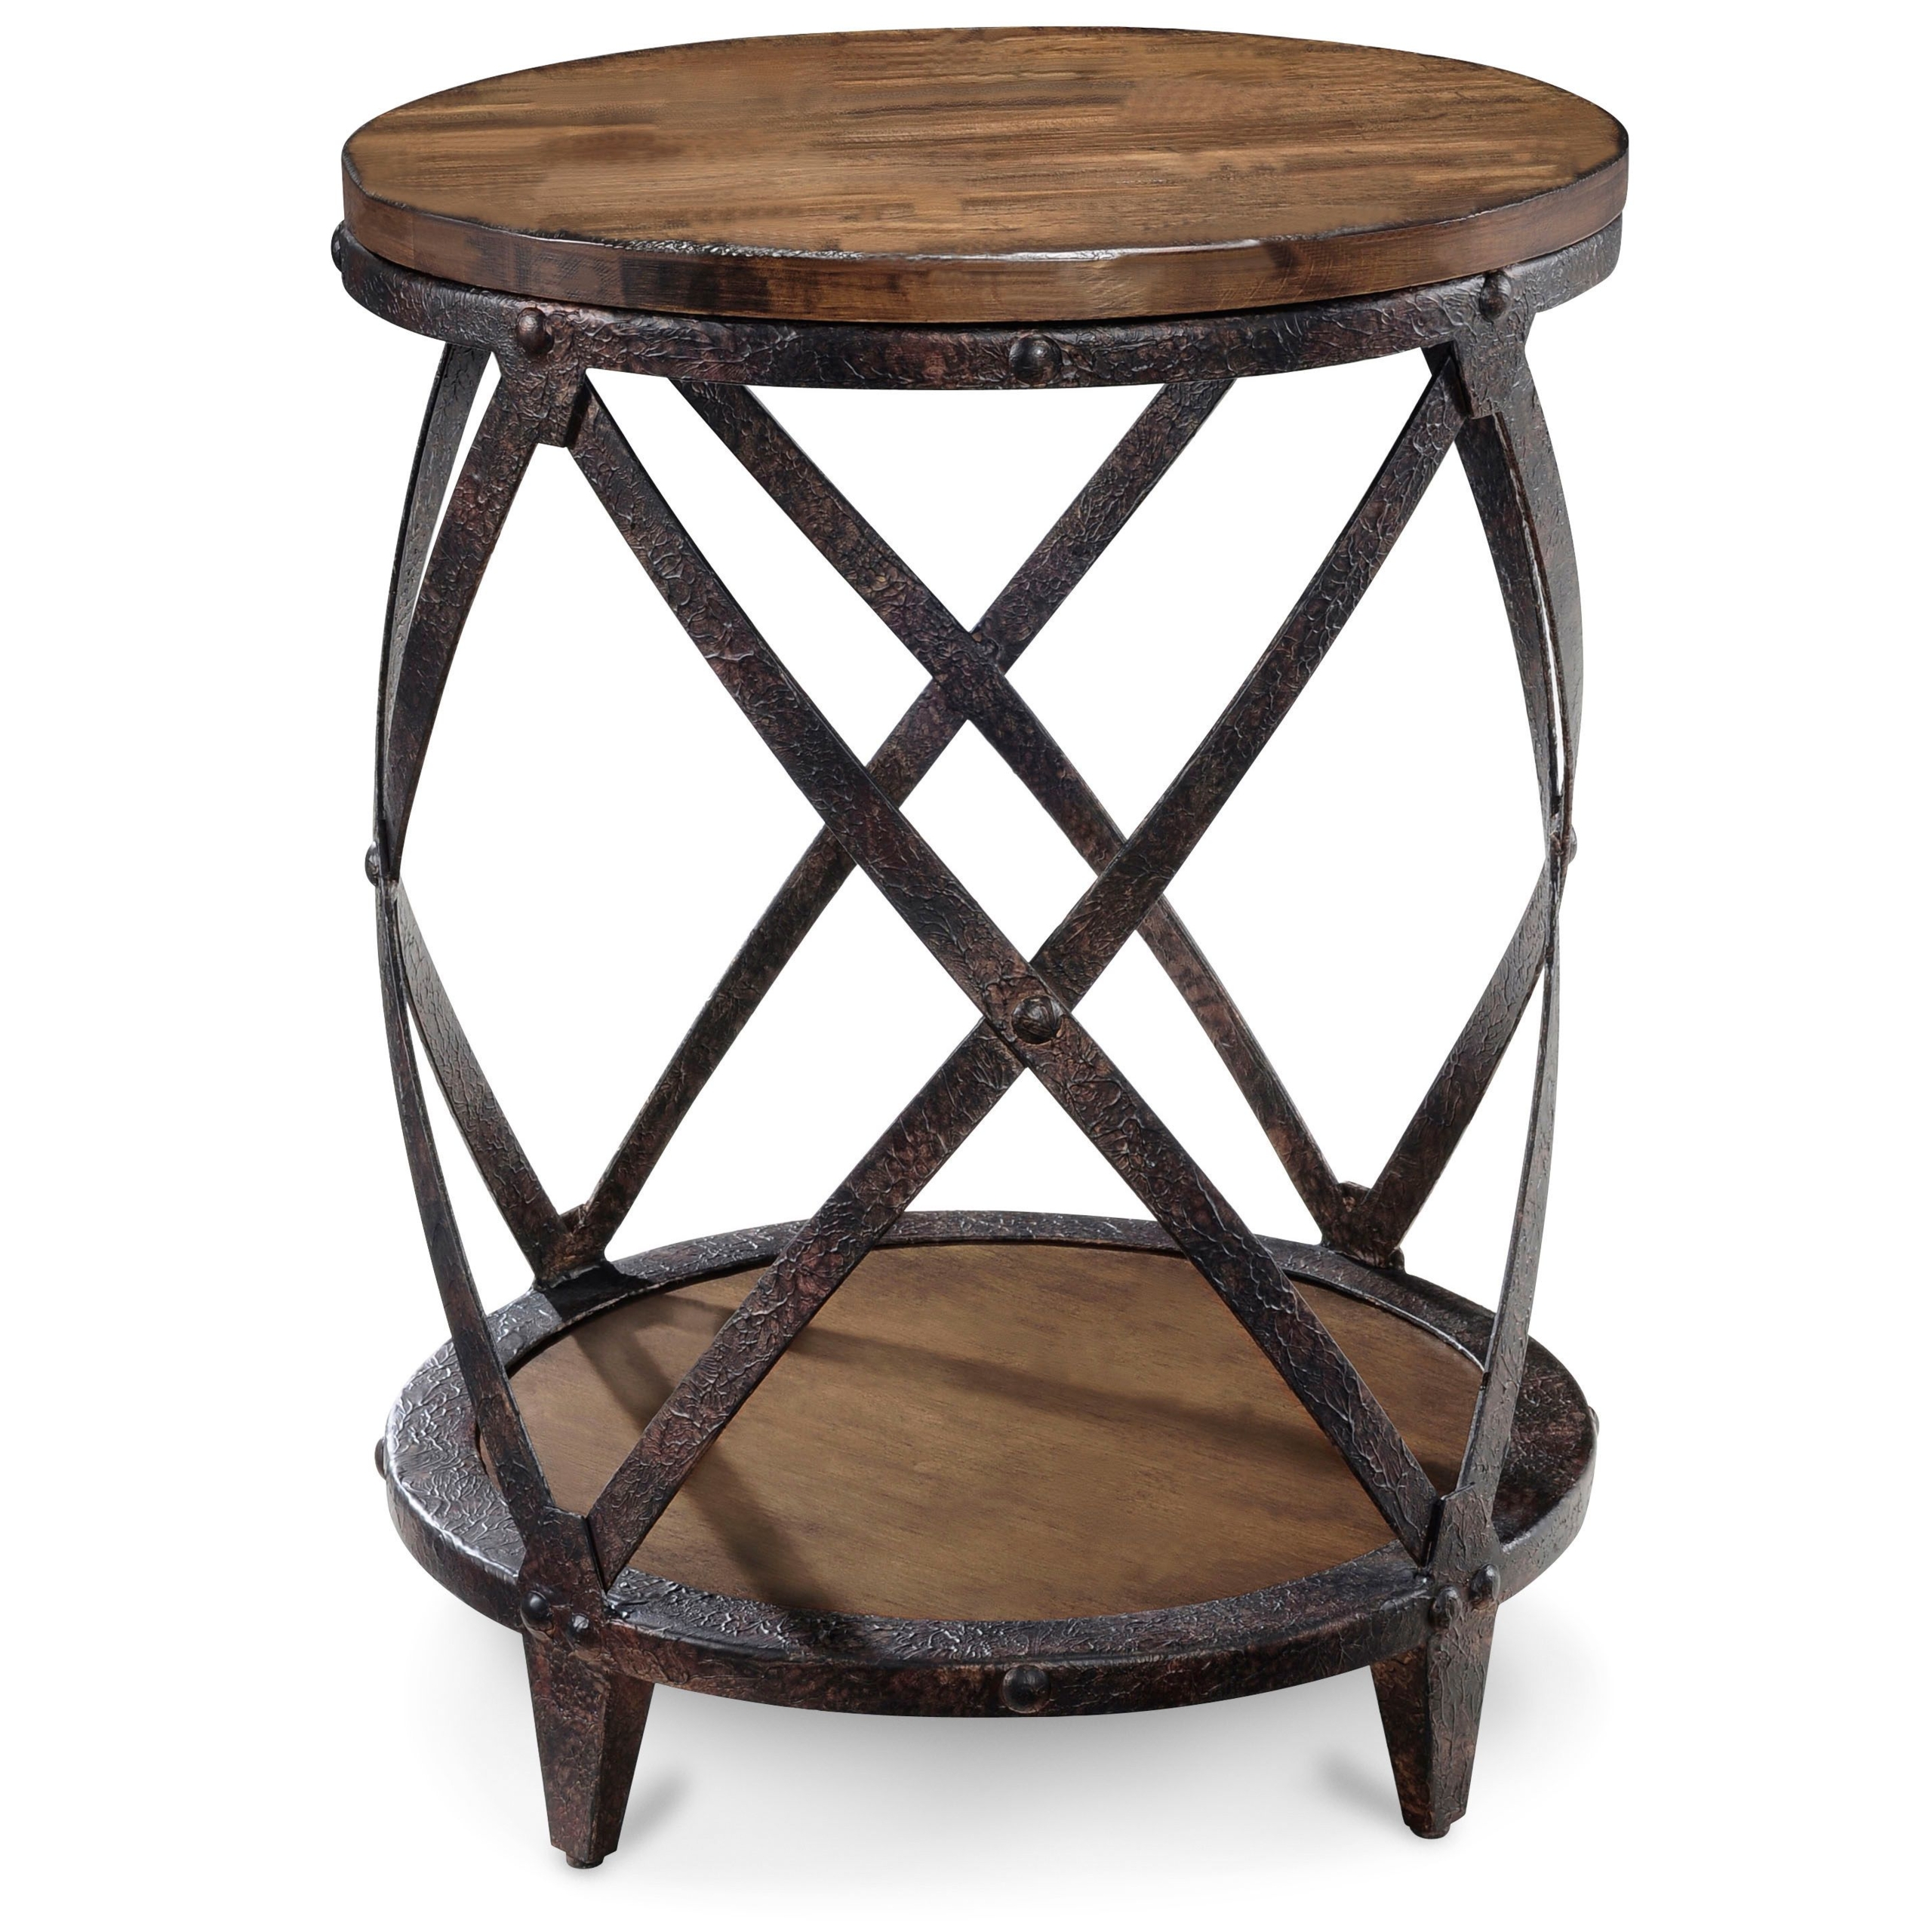 Magnussen T1755 Pinebrook Distressed Natural Pine Wood Round Accent Table 